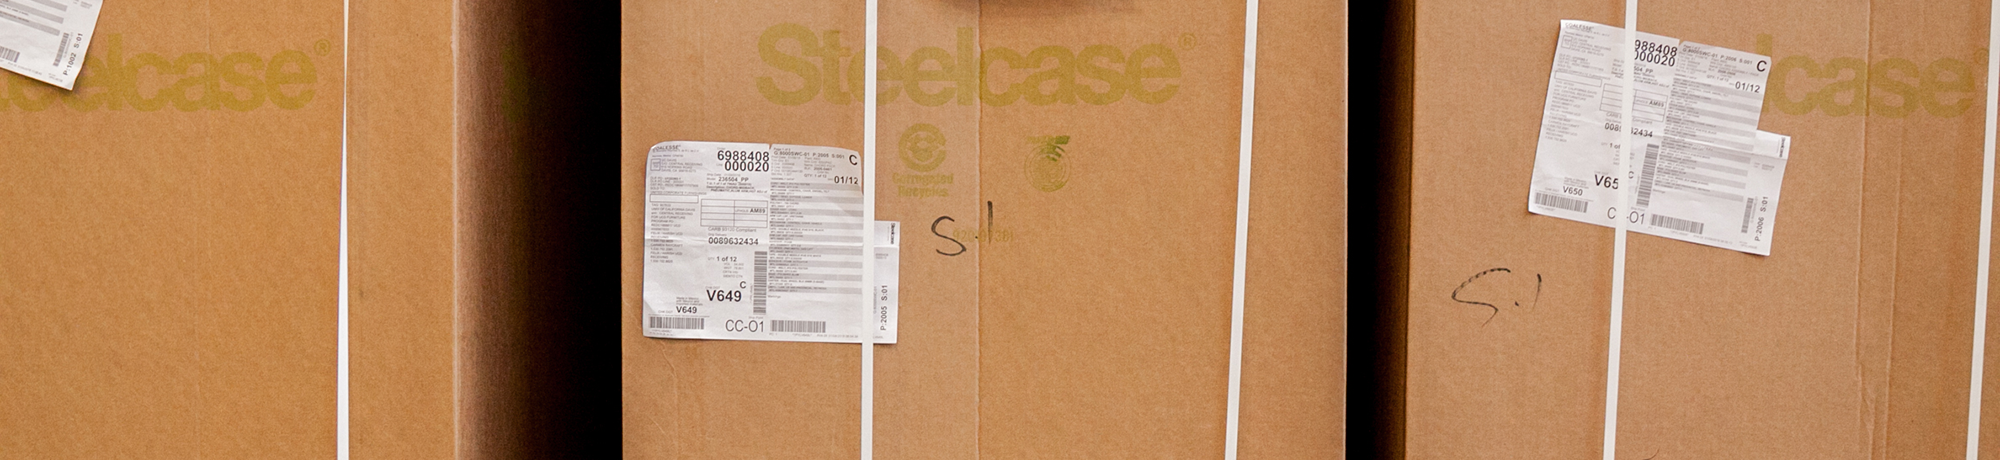 stack of steelcase furniture boxes